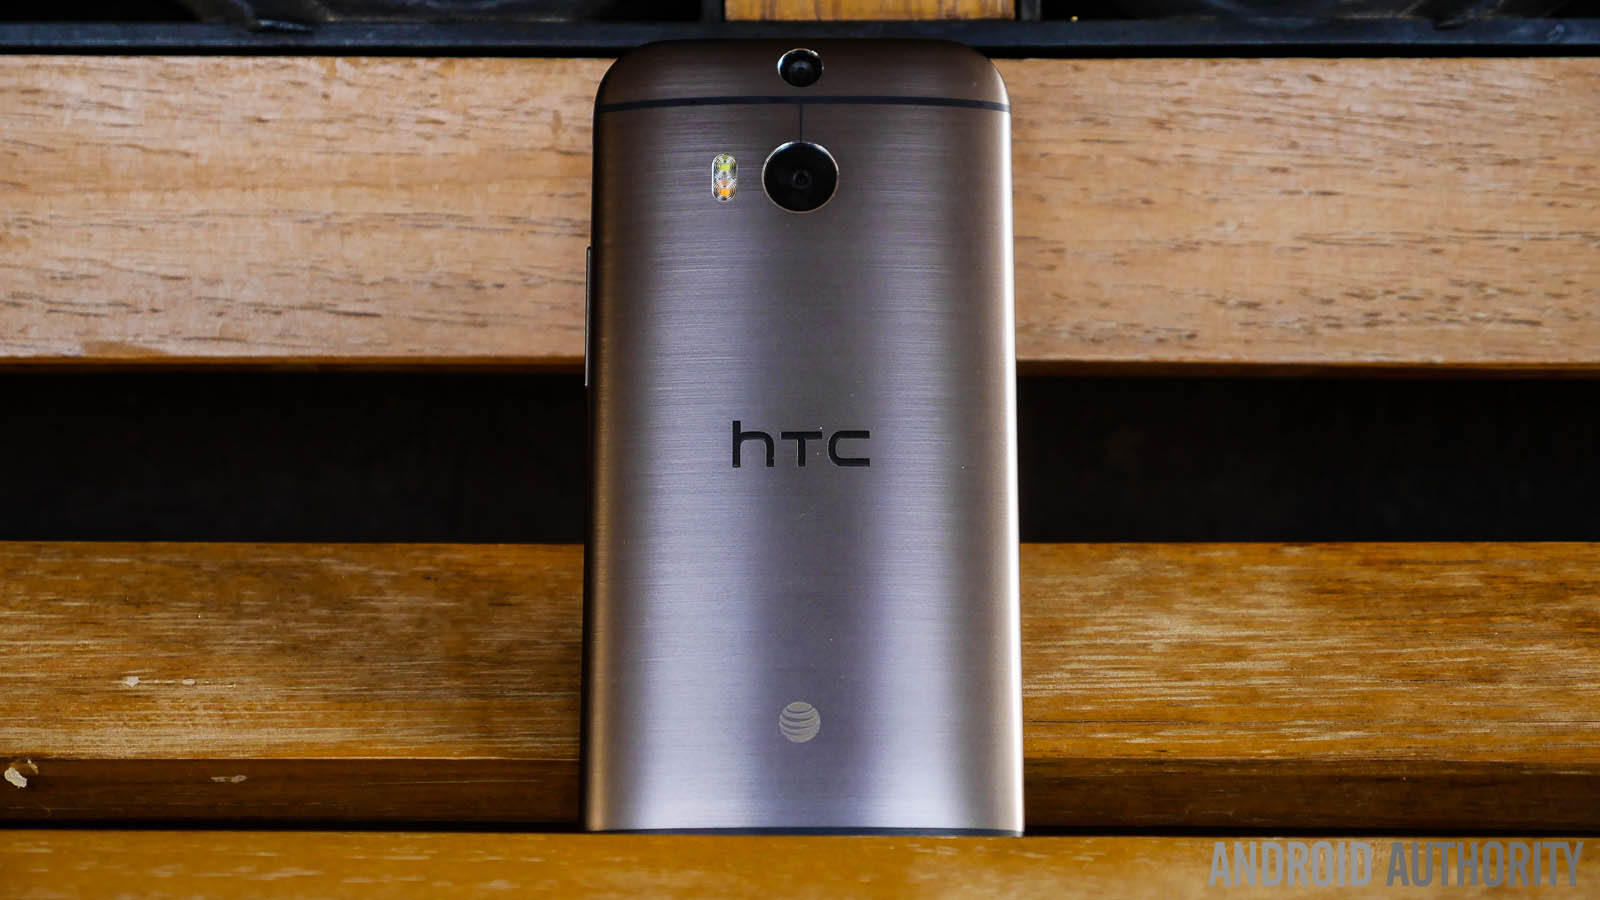 htc one m8 outdoors aa (12 of 14)